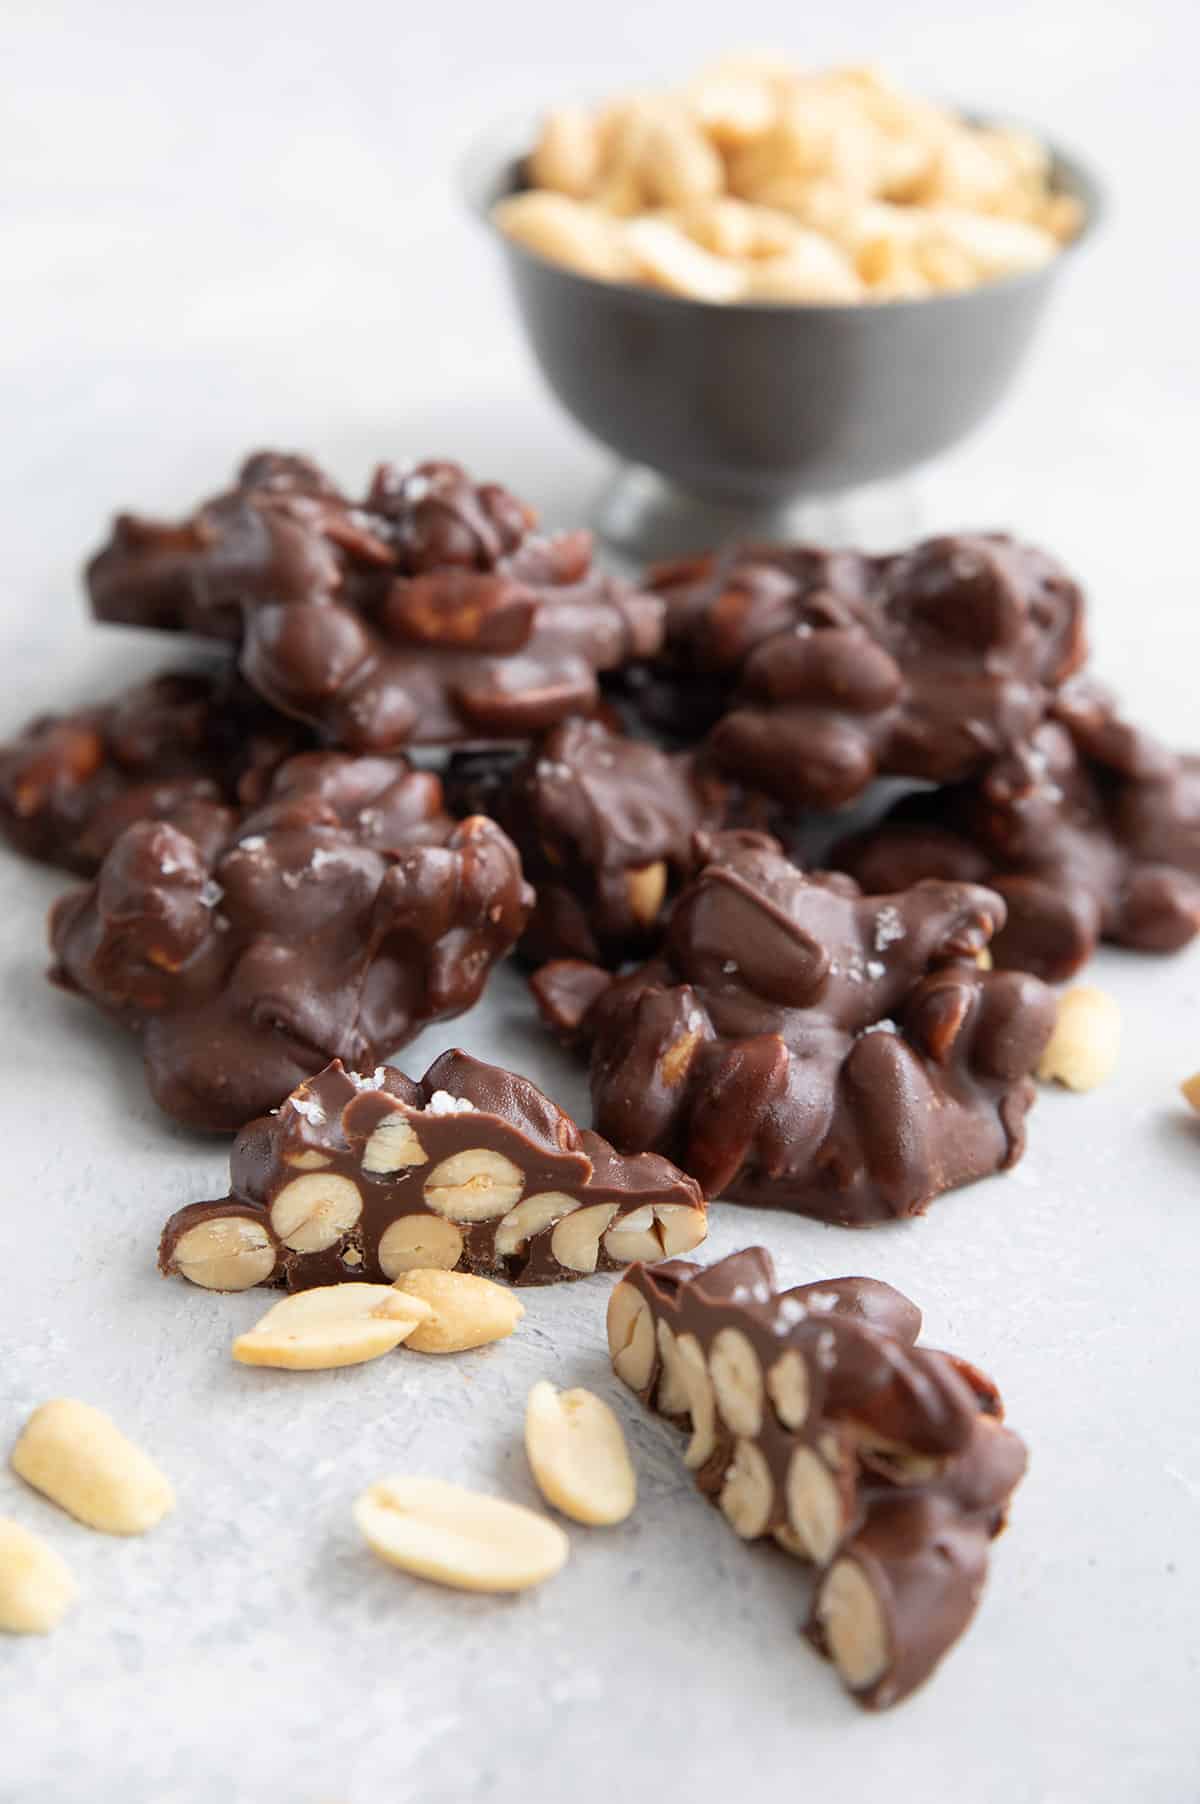 A pile of Keto Peanut Clusters on a concrete table, with one cut open to show the inside.